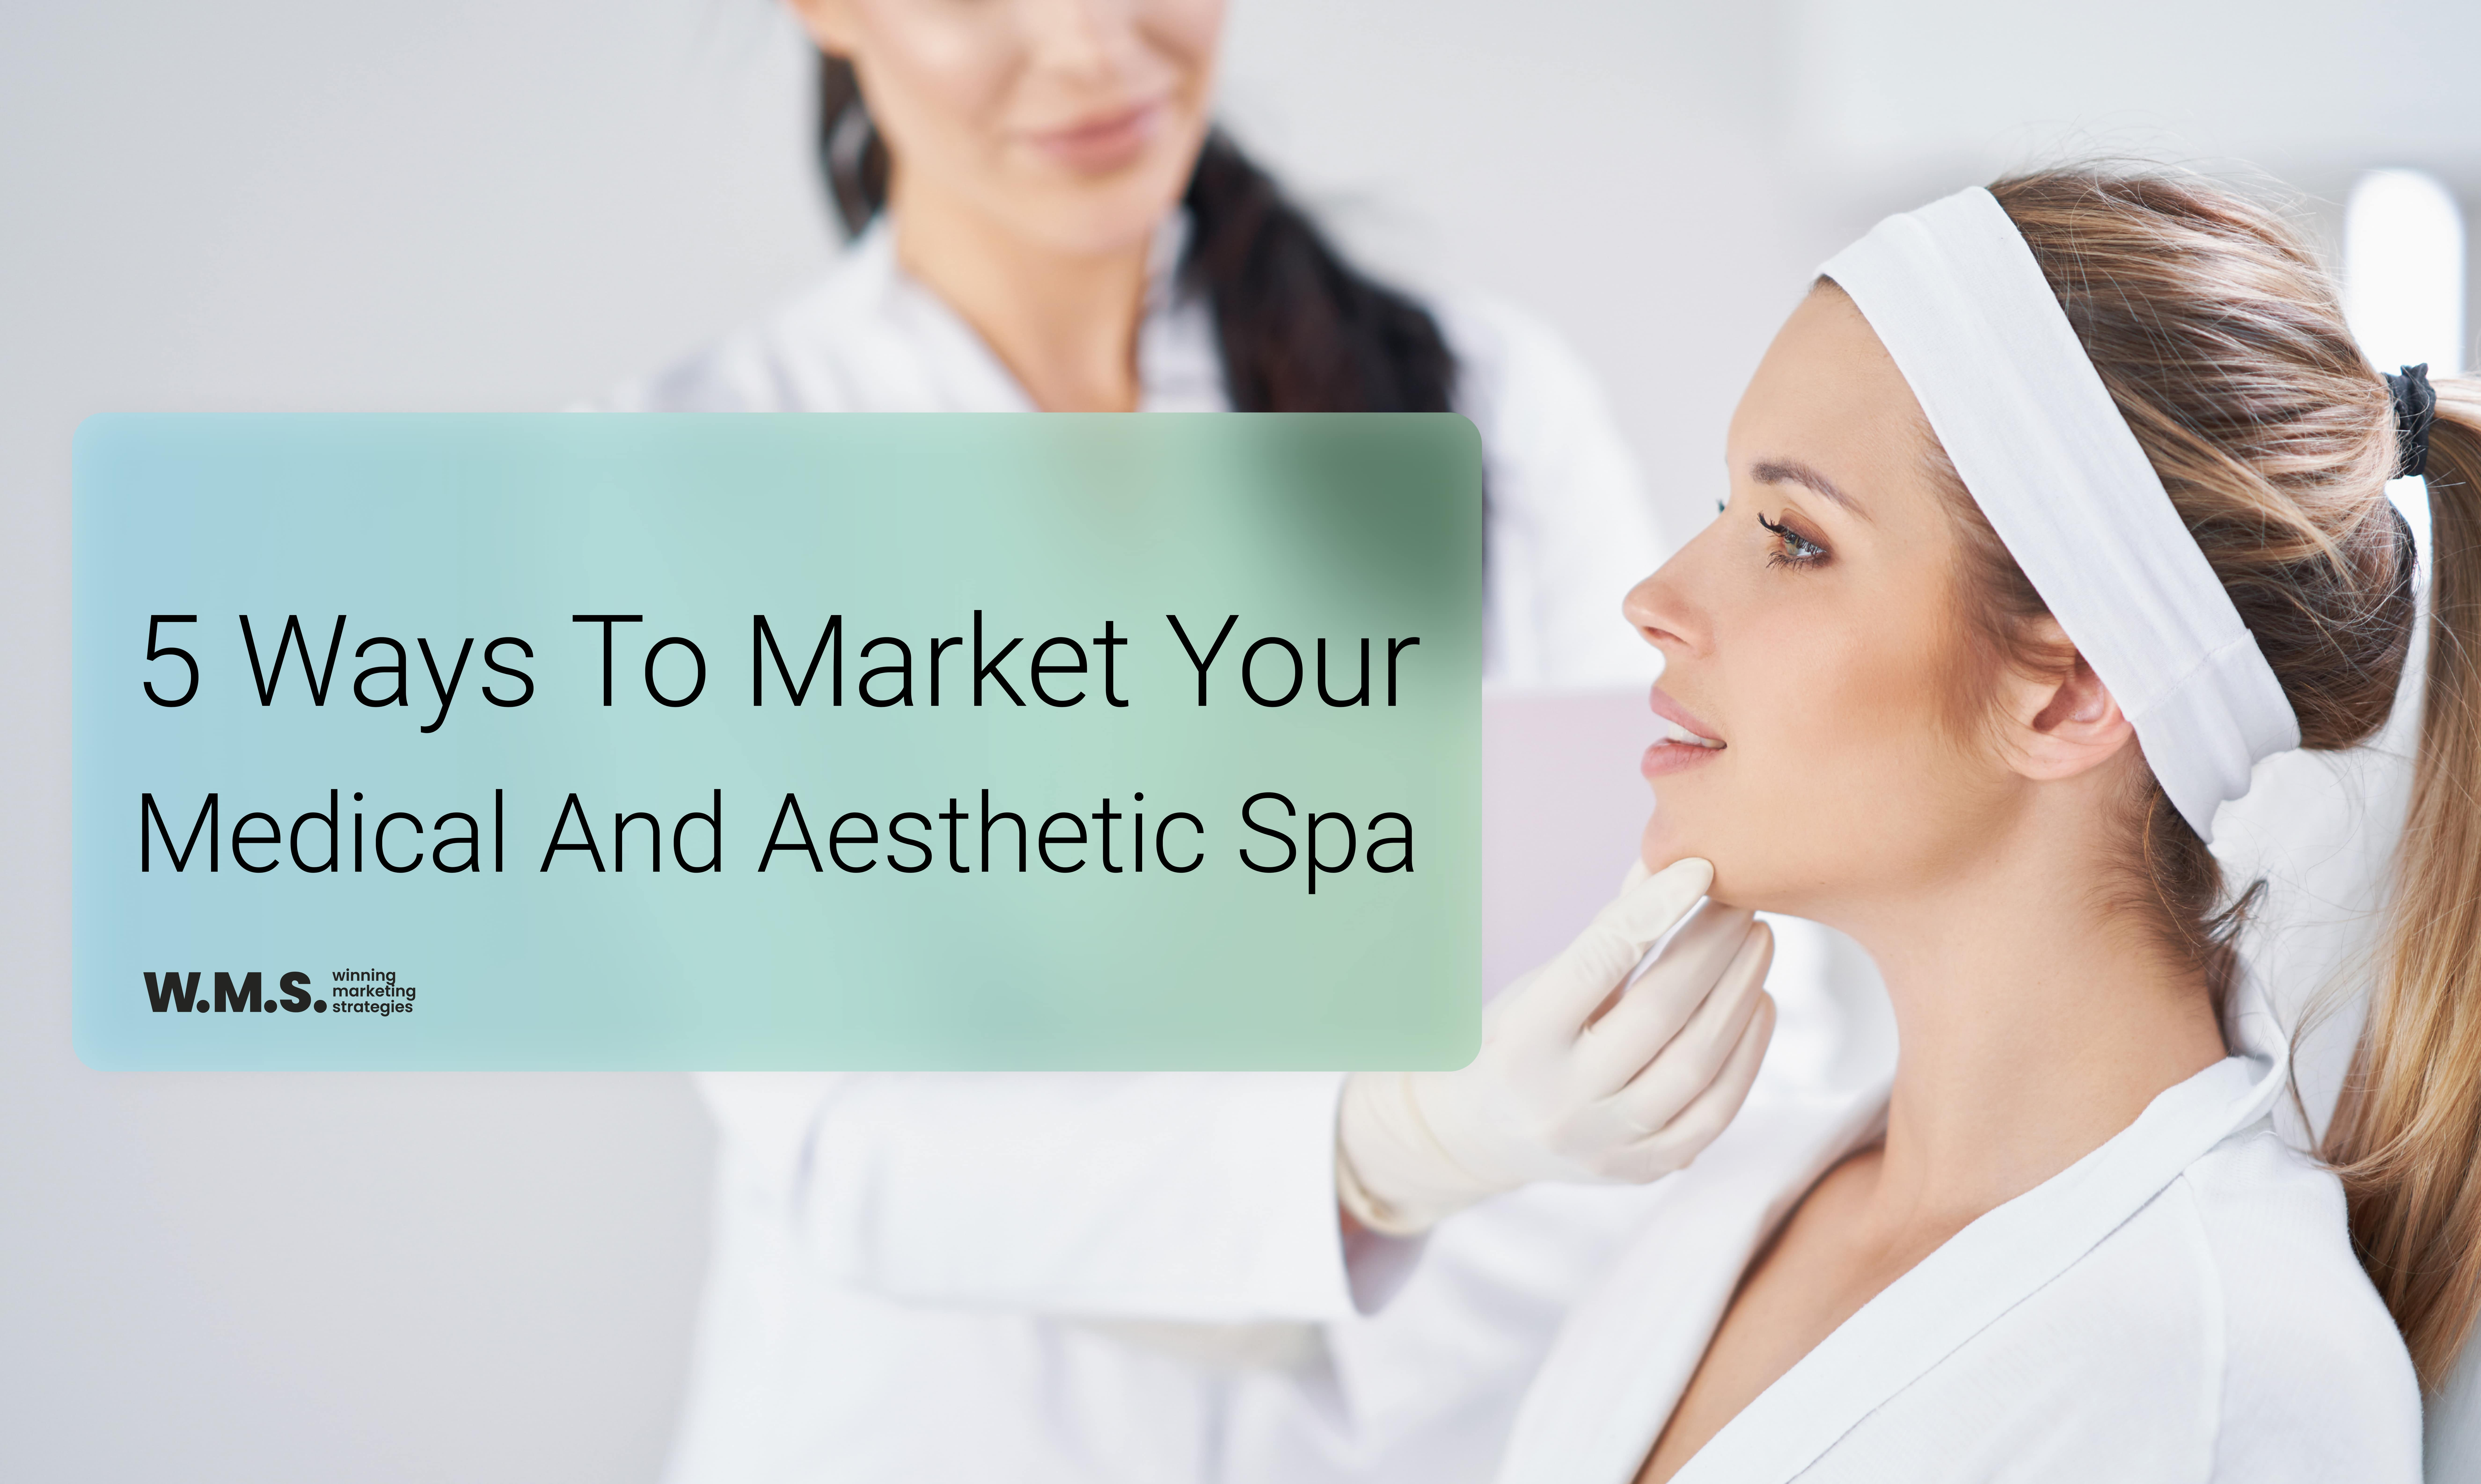 5 Ways To Market Your Medical And Aesthetic Spa